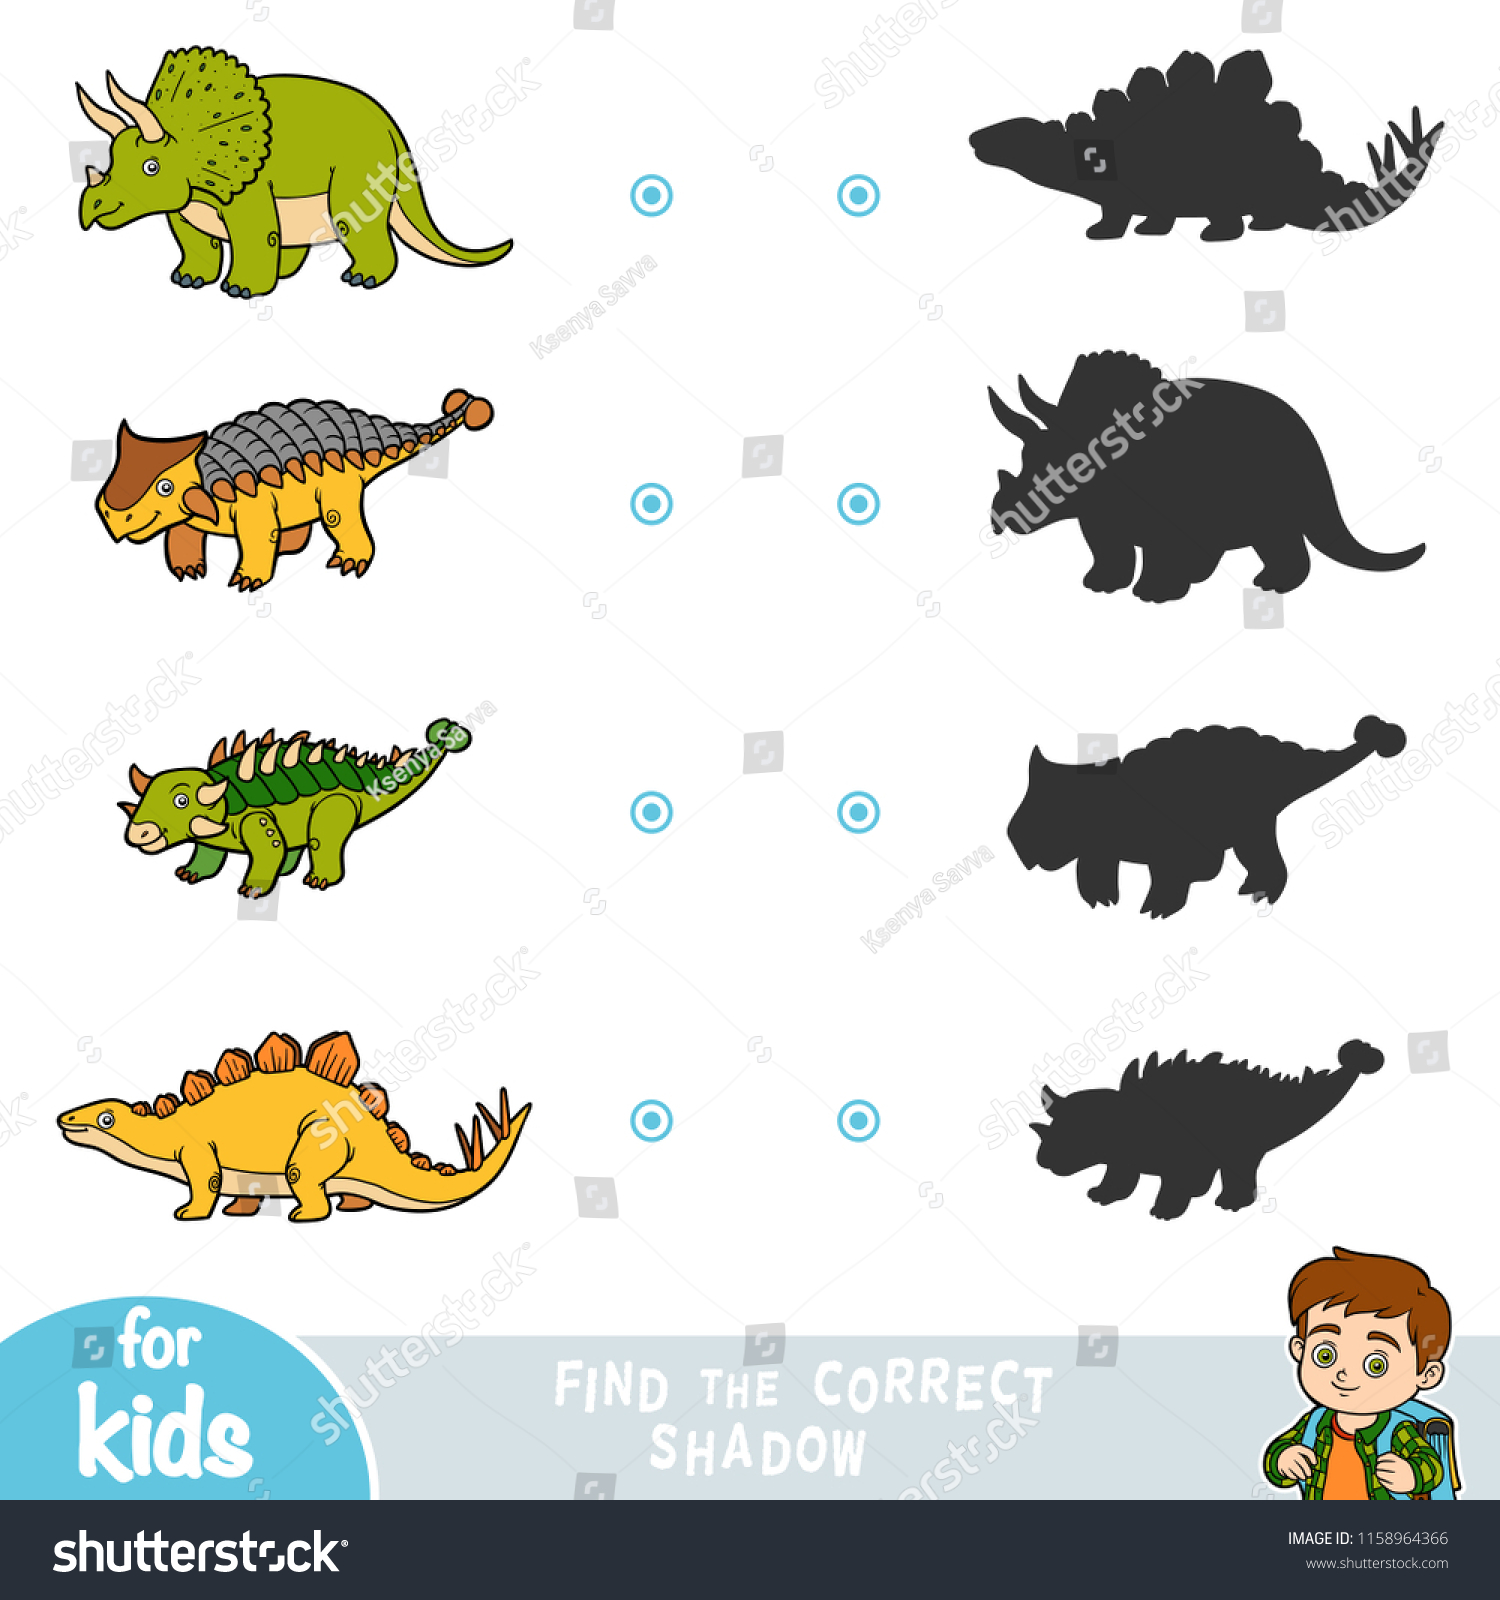 SVG of Find the correct shadow, education game for children. Set of cartoon dinosaurs svg